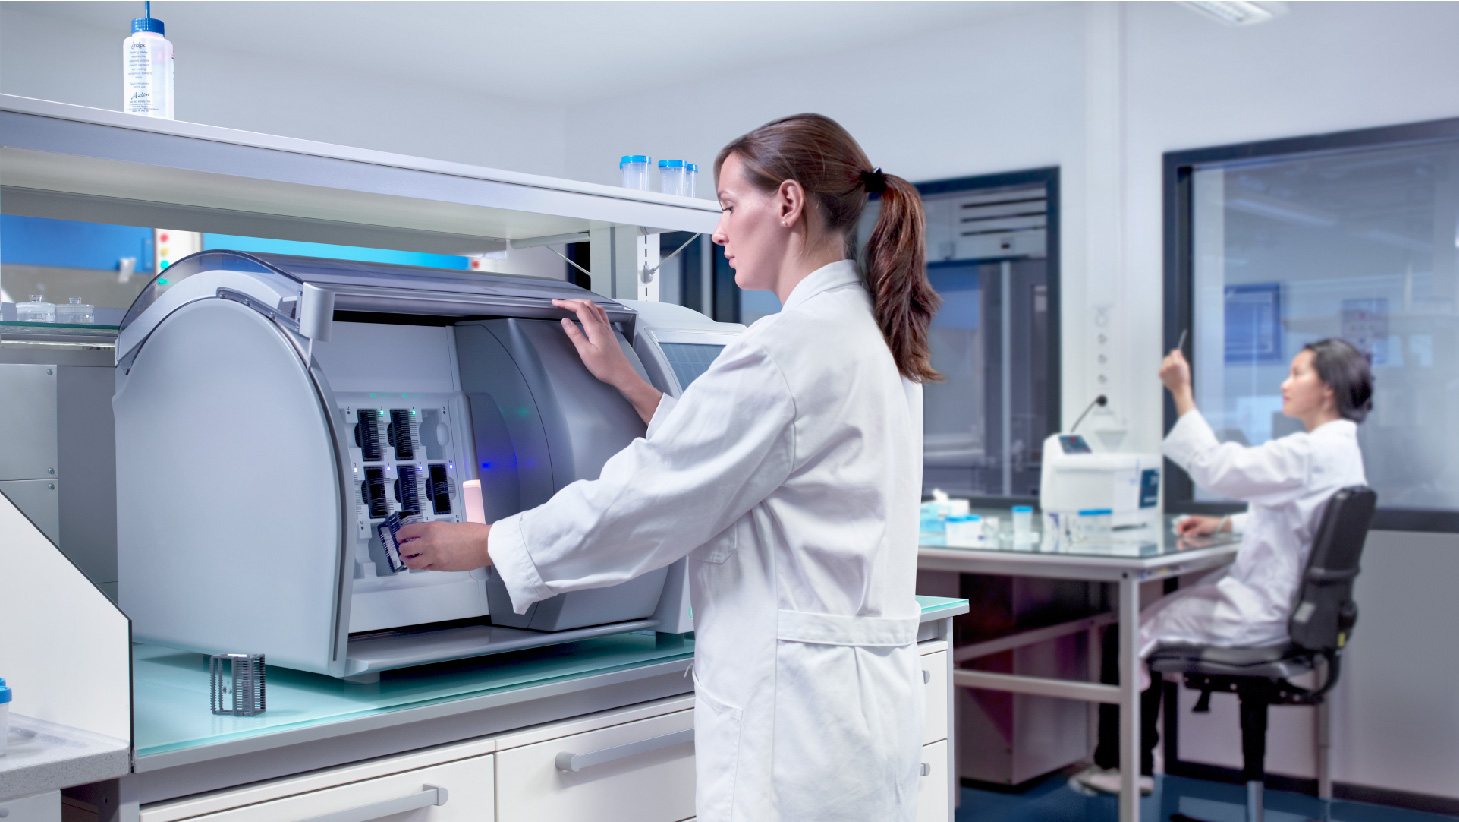 How digital pathology can save 19 working hours per day - Case study | Philips